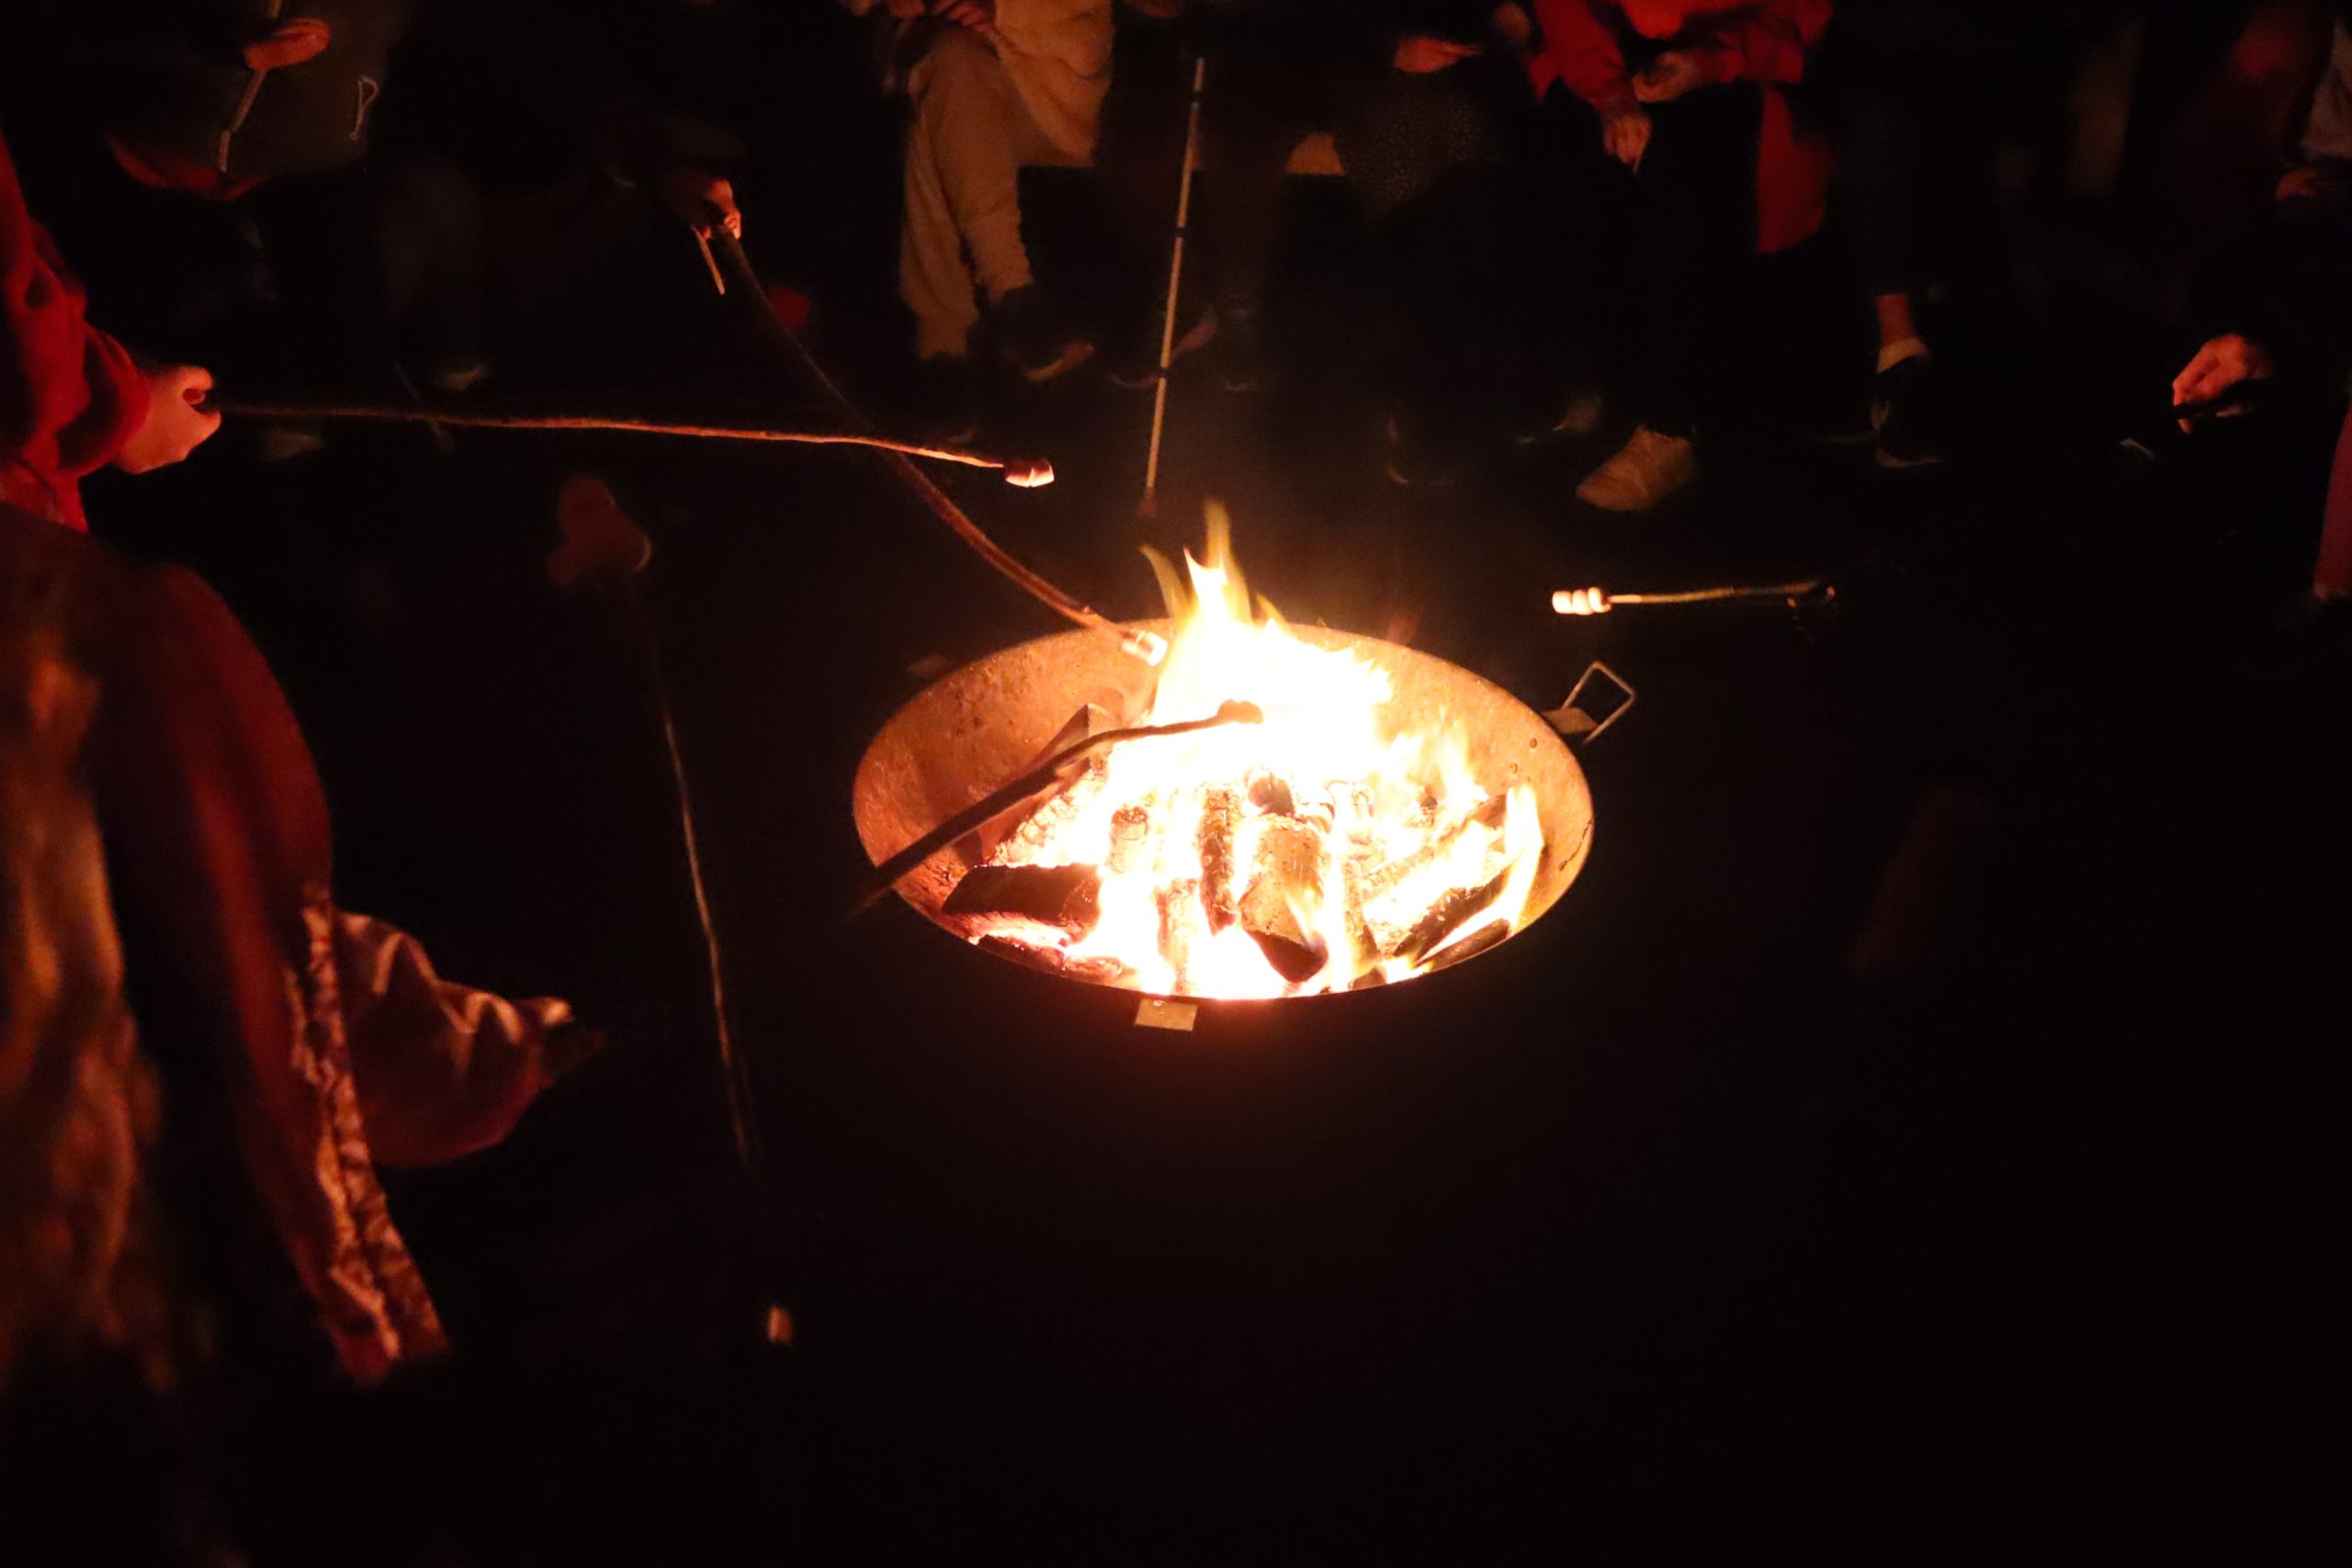 Marshmallows on sticks being held over a camp fire